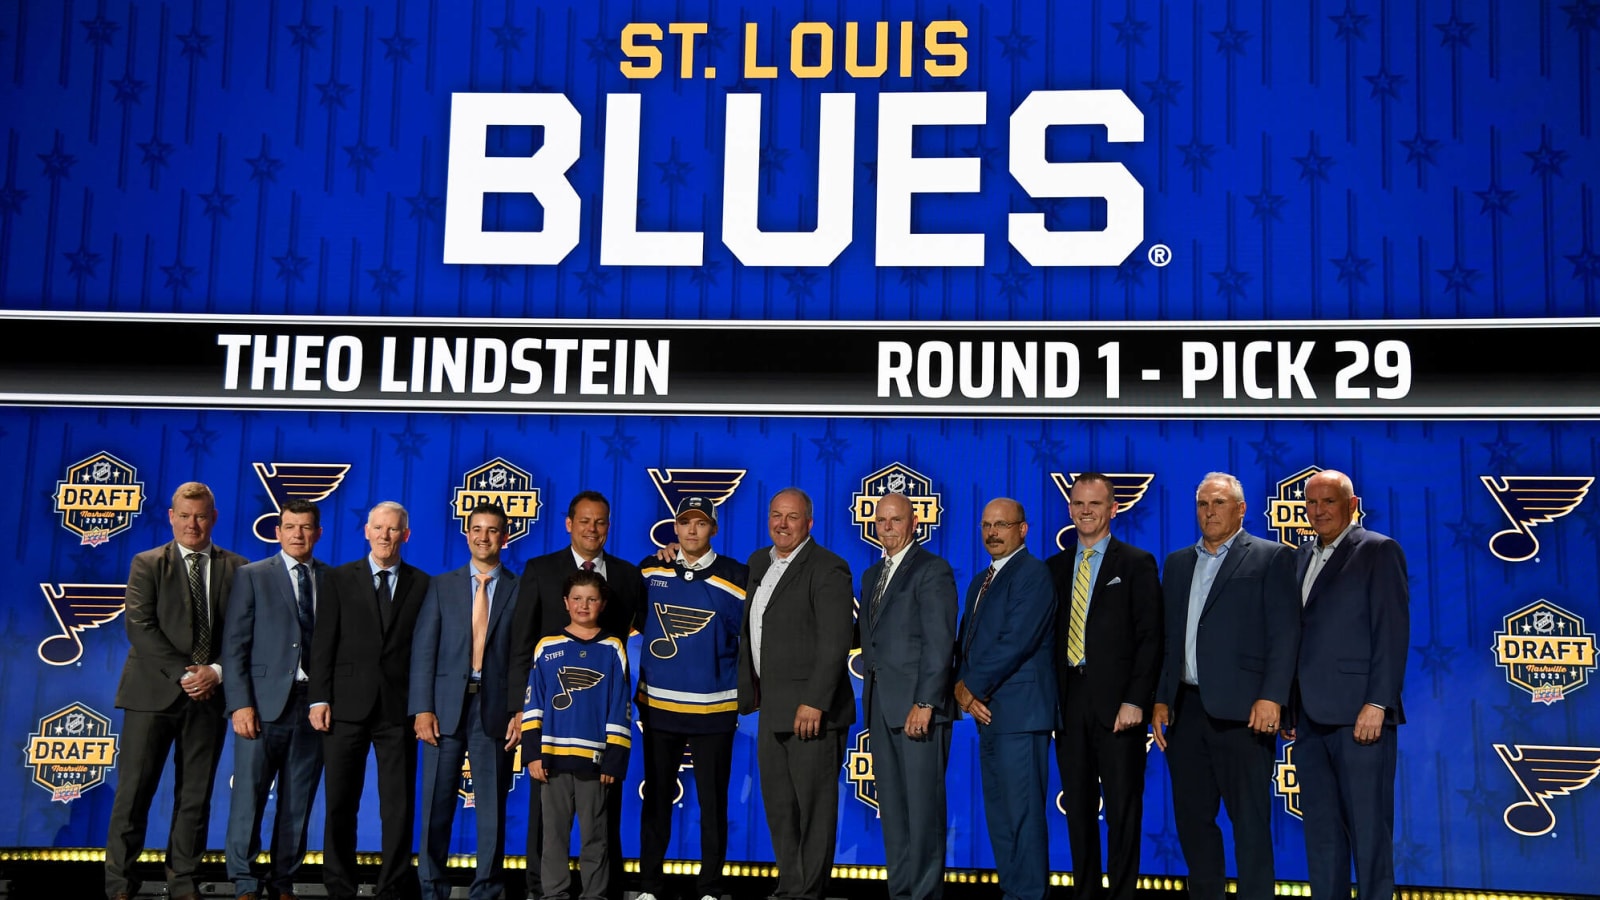 Blues sign first-round pick to three-year contract